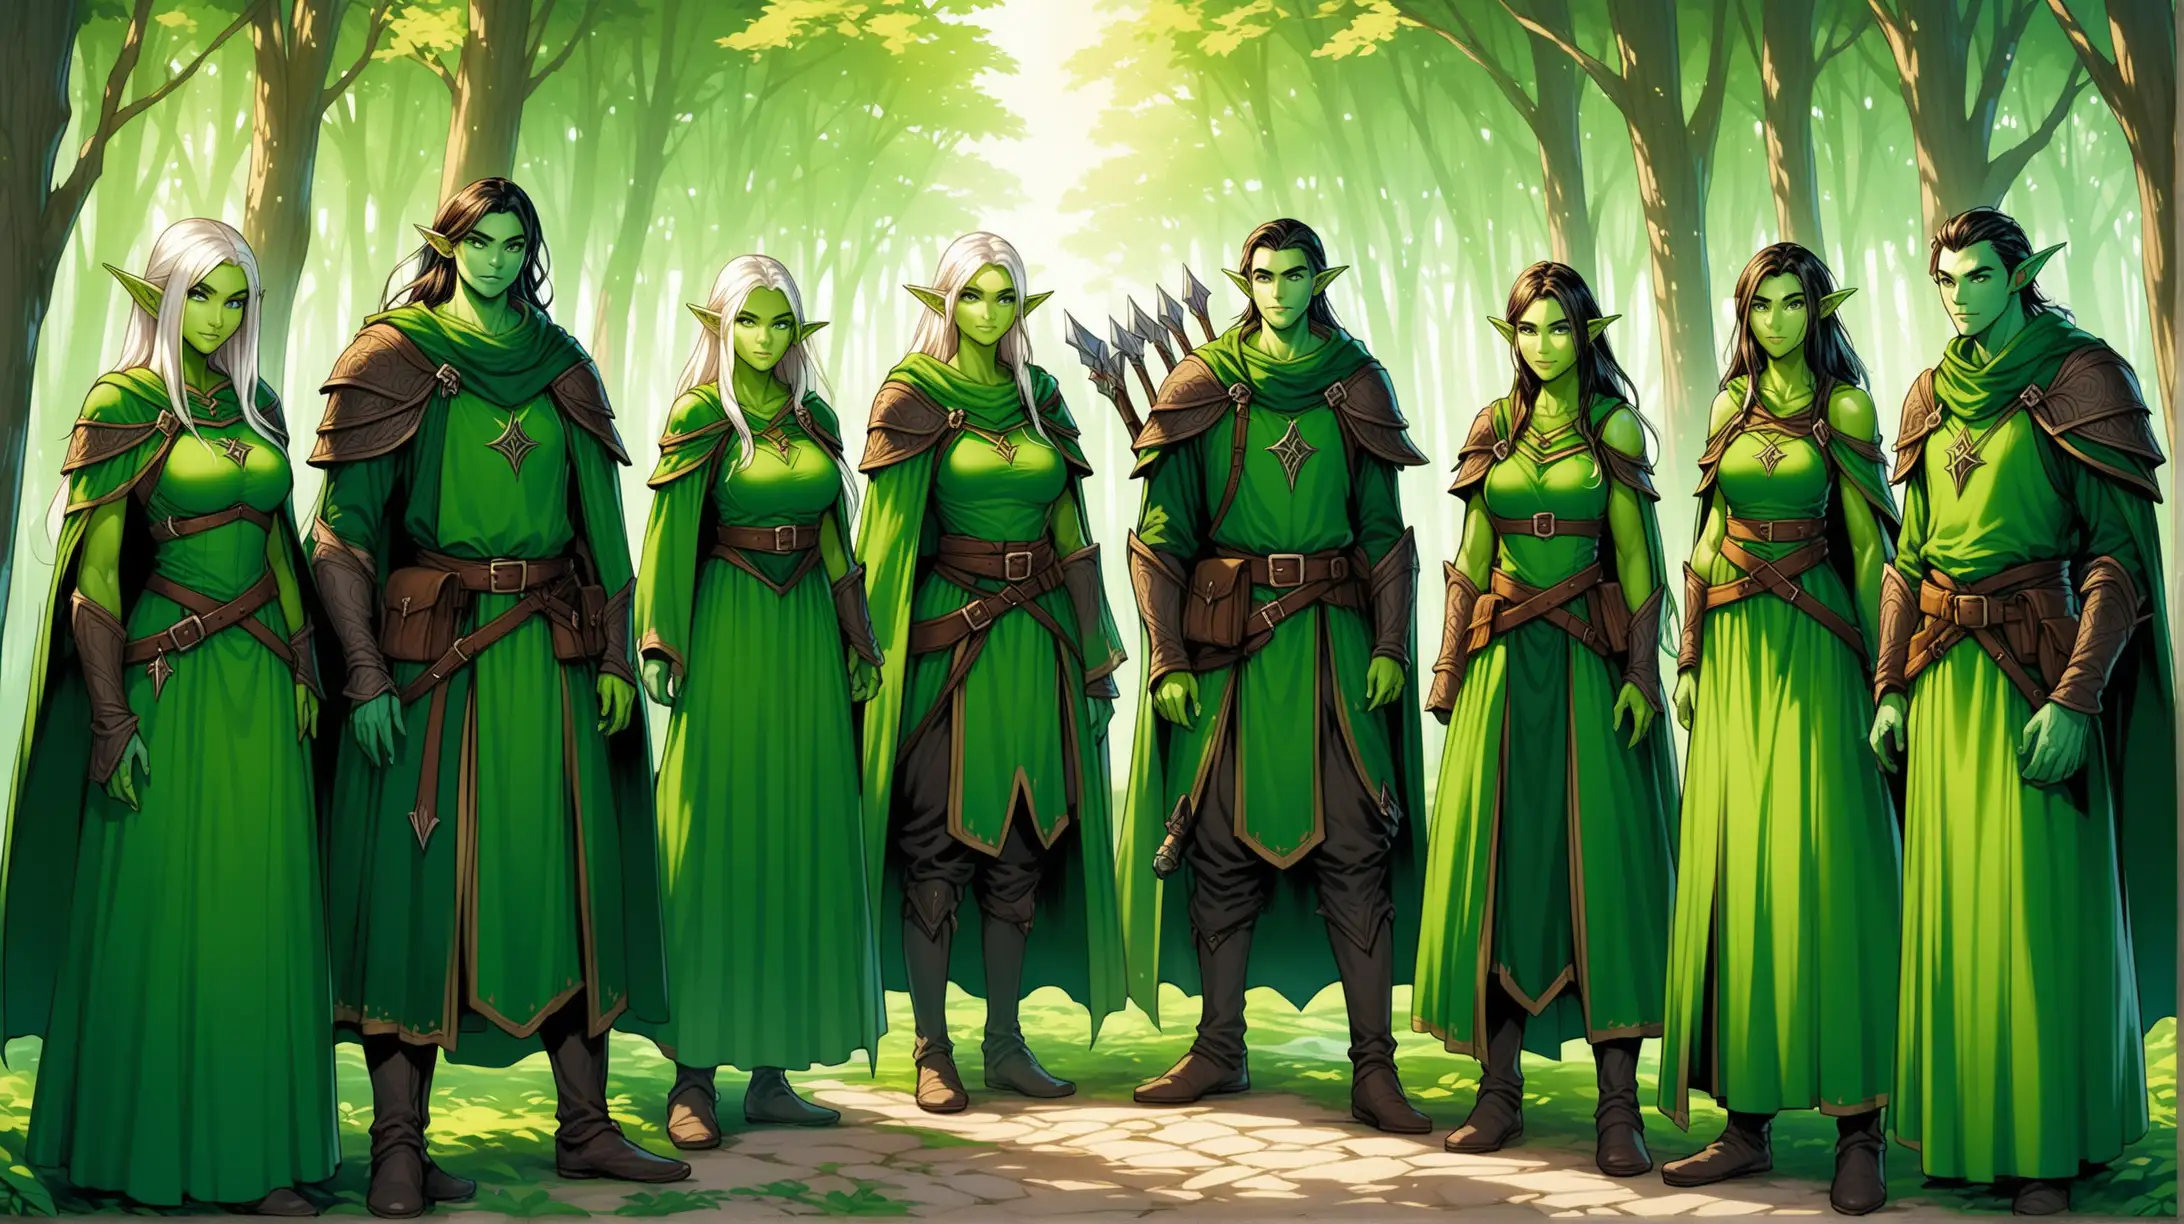 Medieval Fantasy Forest Elf City with Rangers Wizards and Green Elves